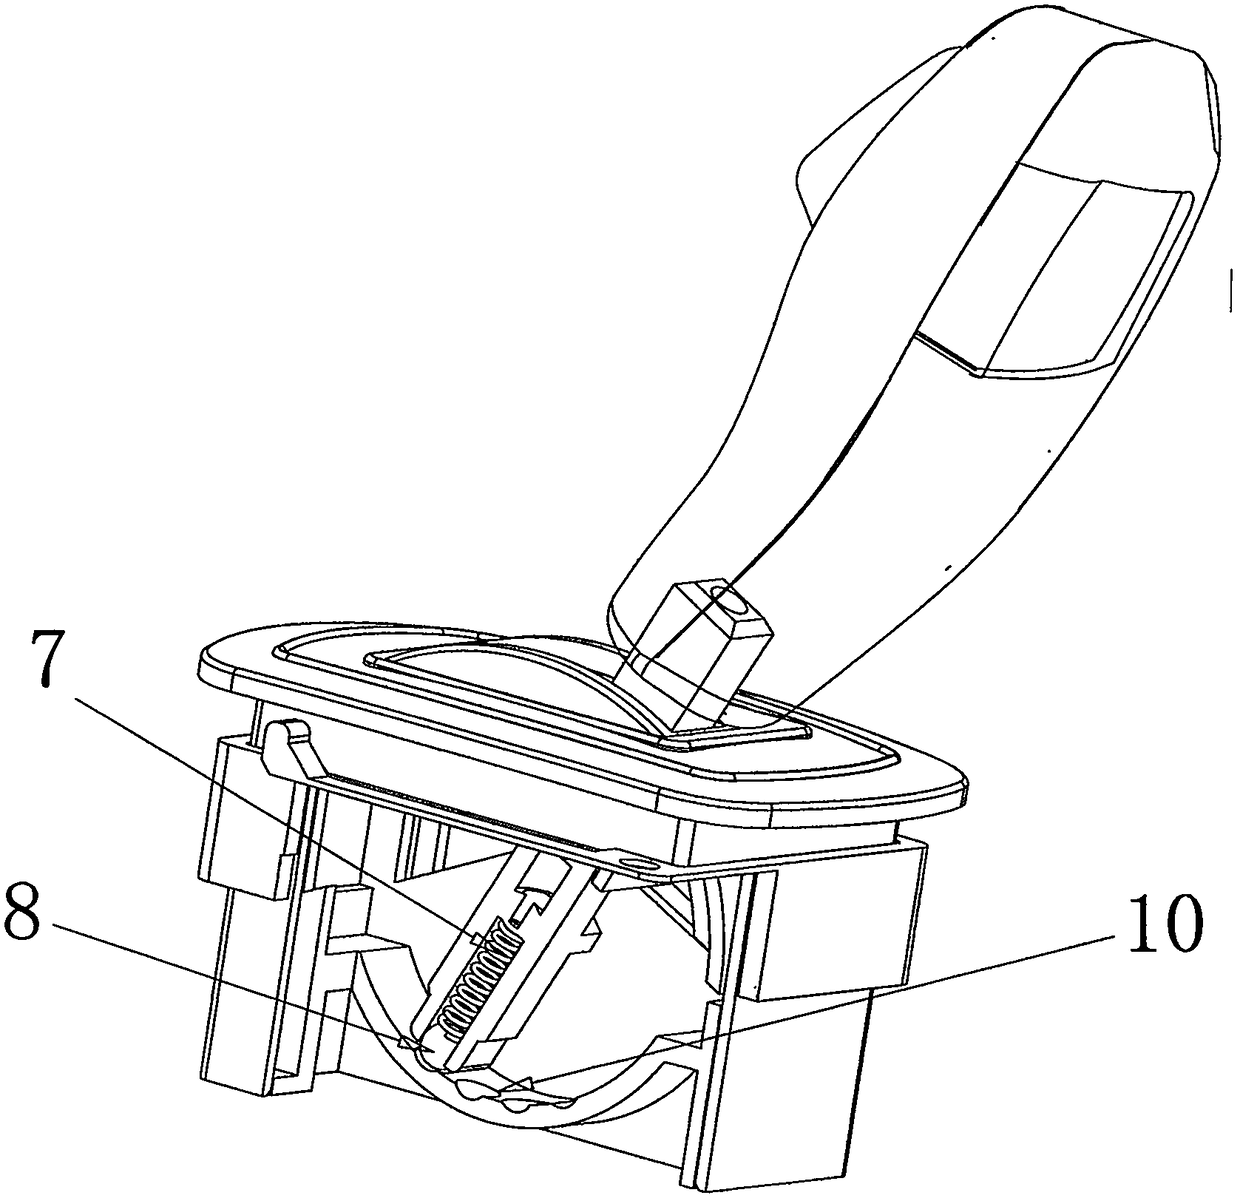 A shifting gear shift controller for an electric baby carriage